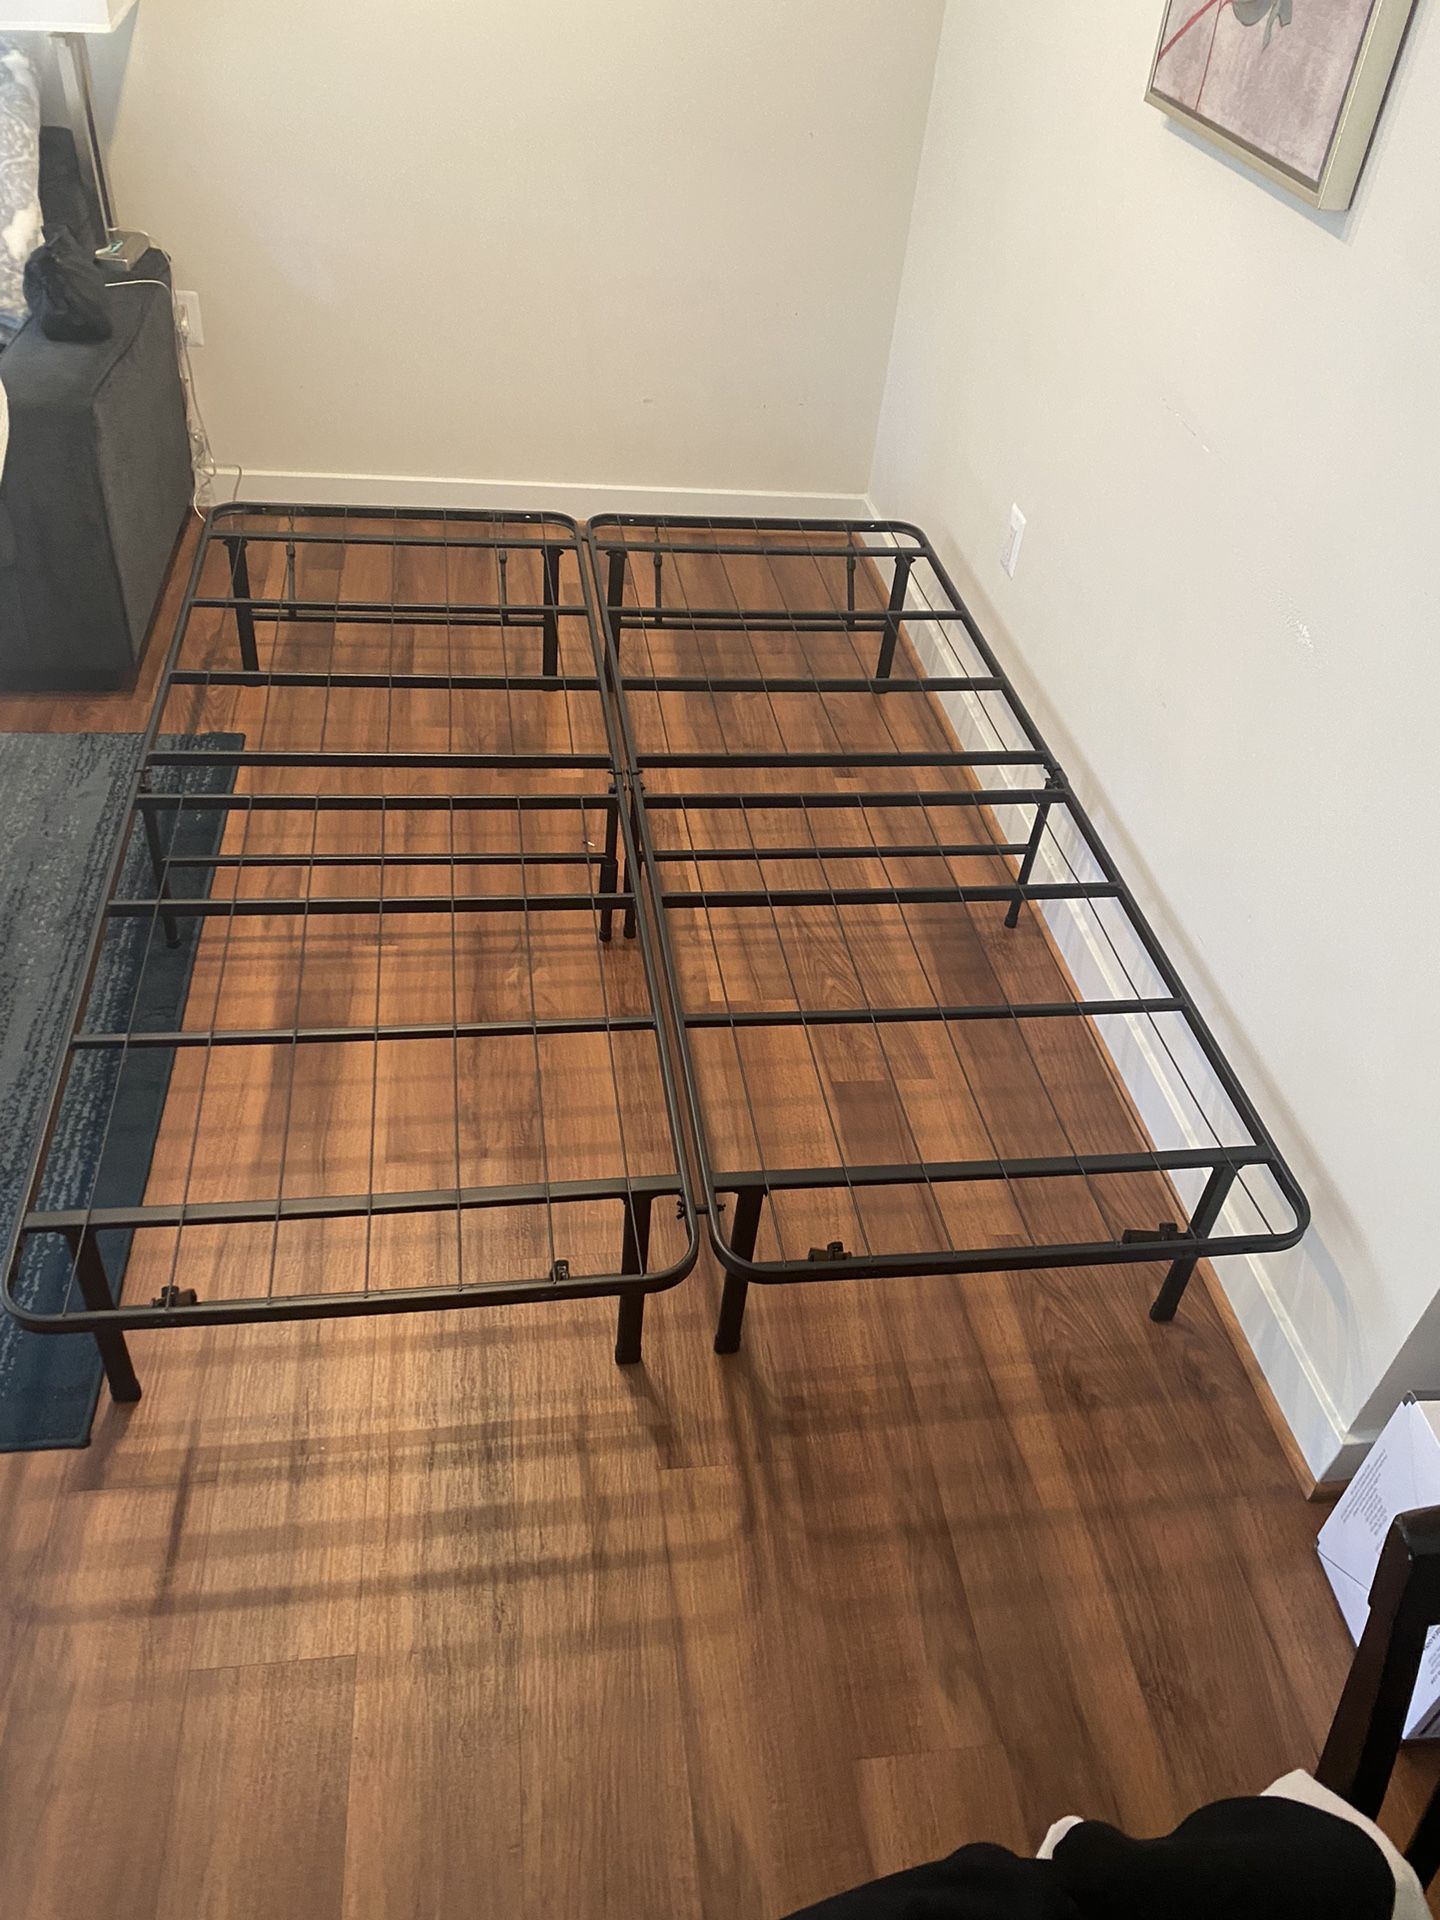 Queen Bed Frame - Foldable 